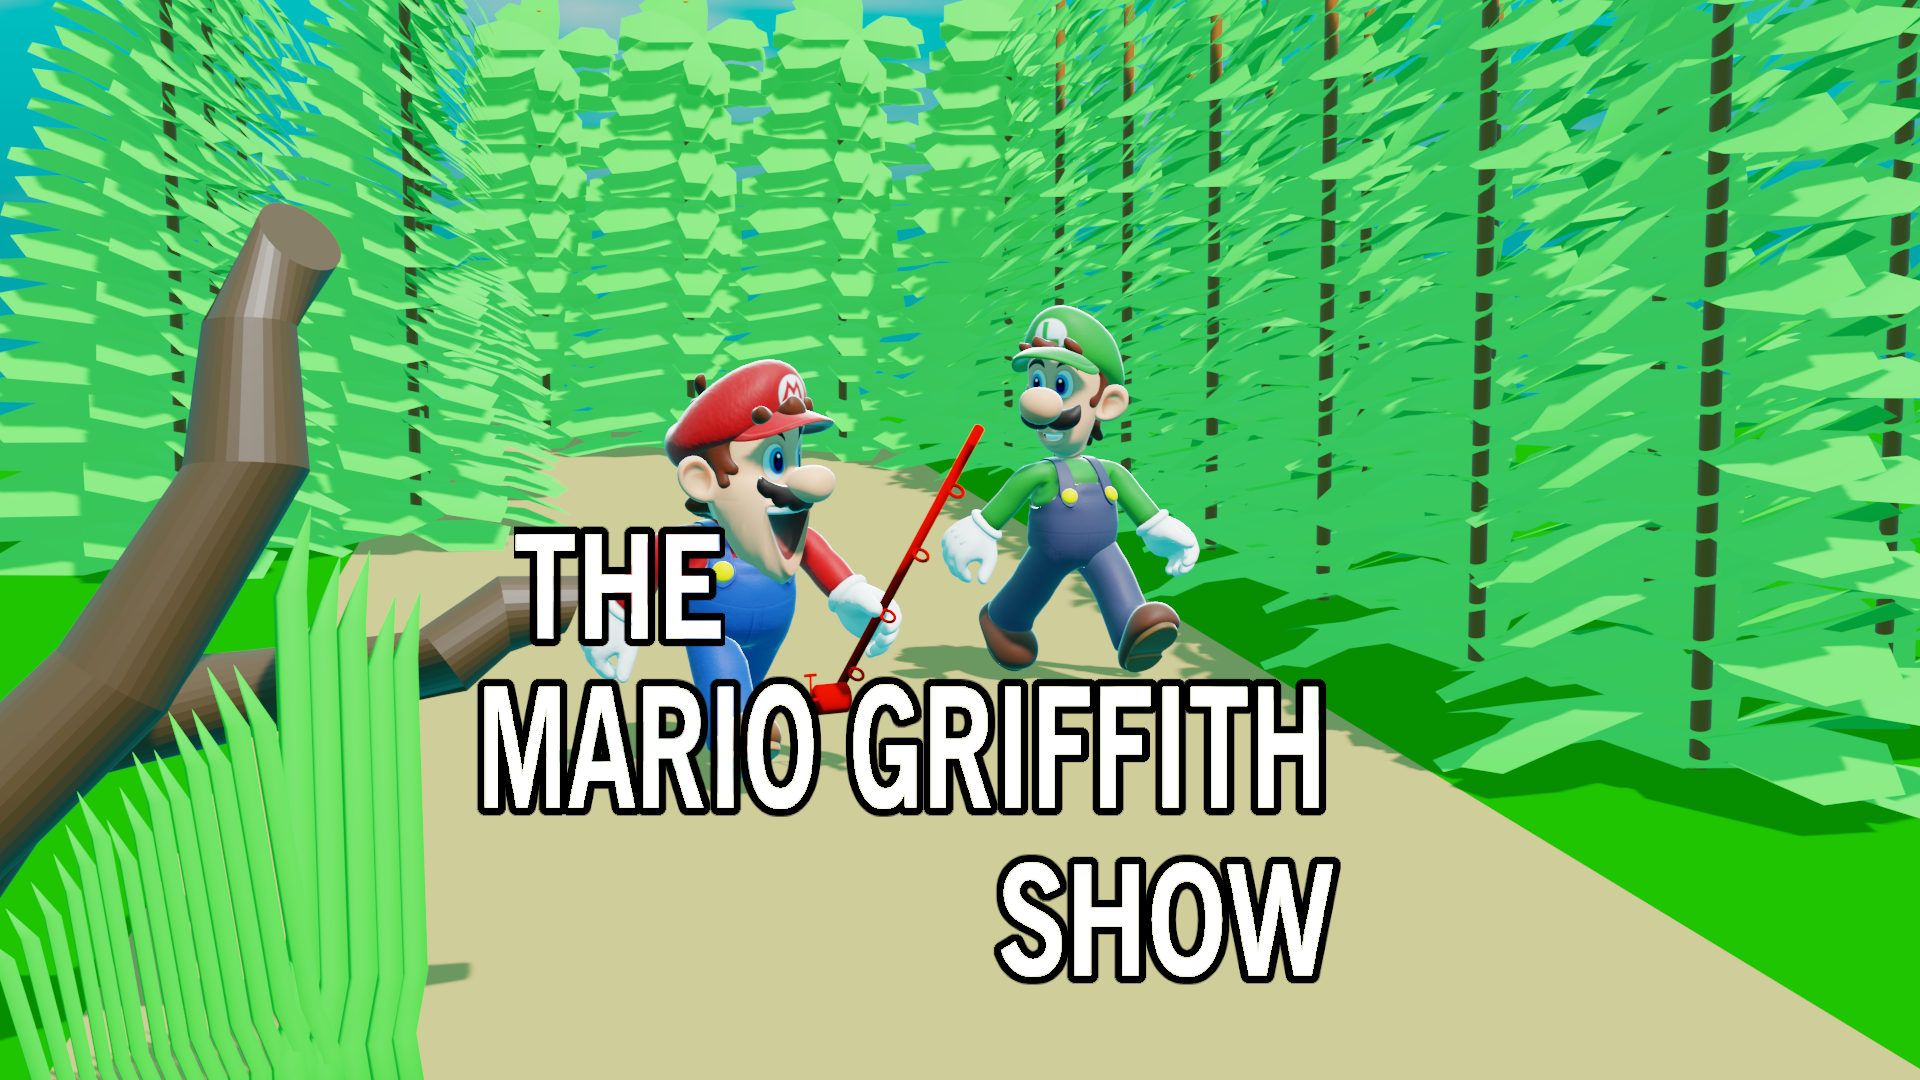 The Mario Griffith Show - COLORIZED by TookeyDookey on DeviantArt